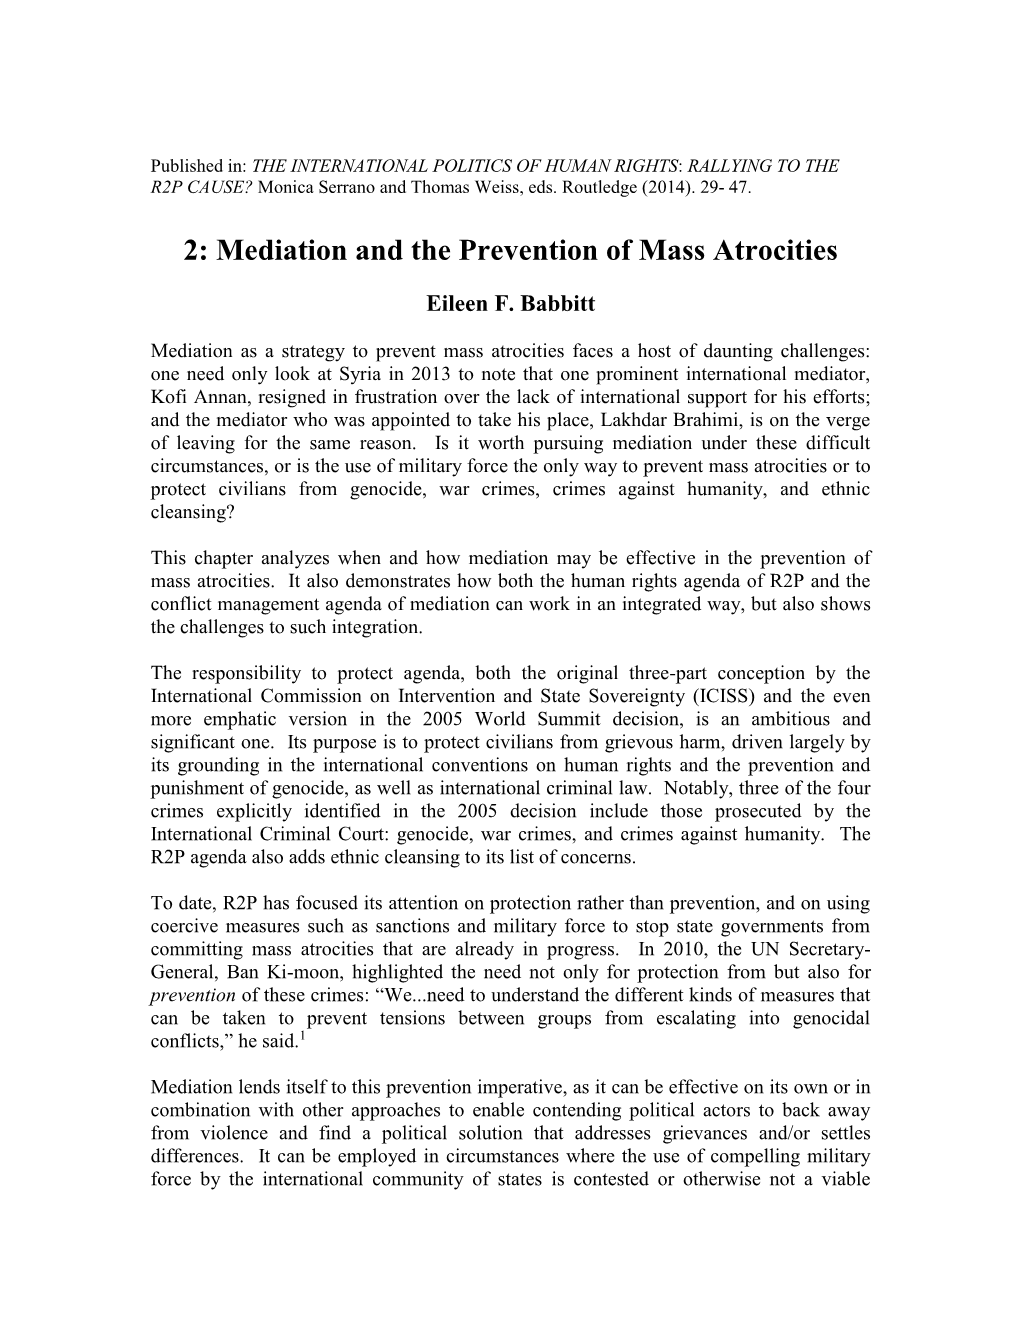 Mediation and the Prevention of Mass Atrocities